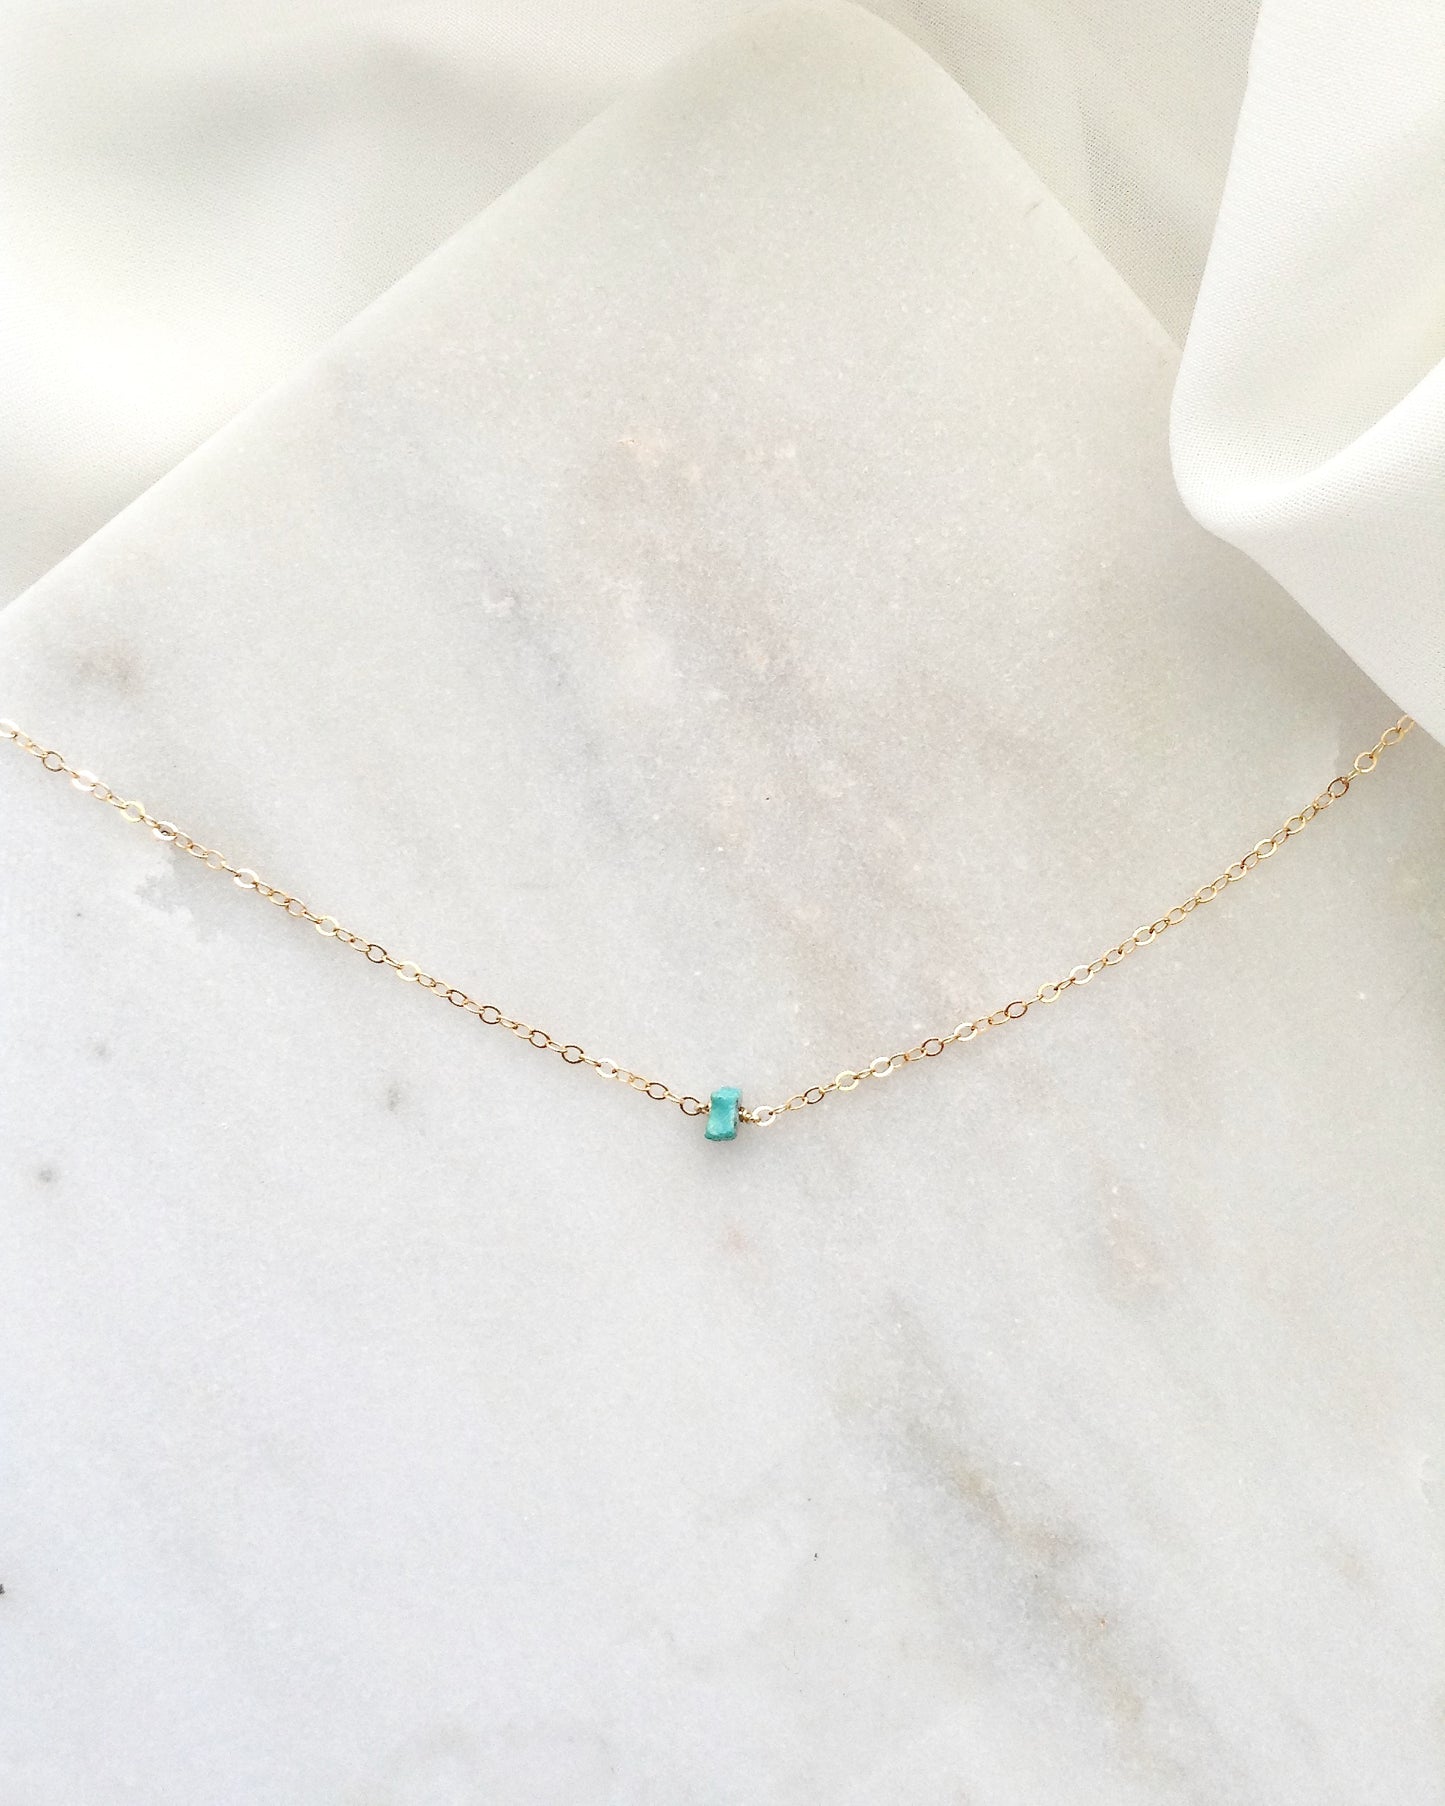 Simple Turquoise Choker Necklace | Dainty Chain Choker in Gold Filled or Sterling Silver | IB Jewelry